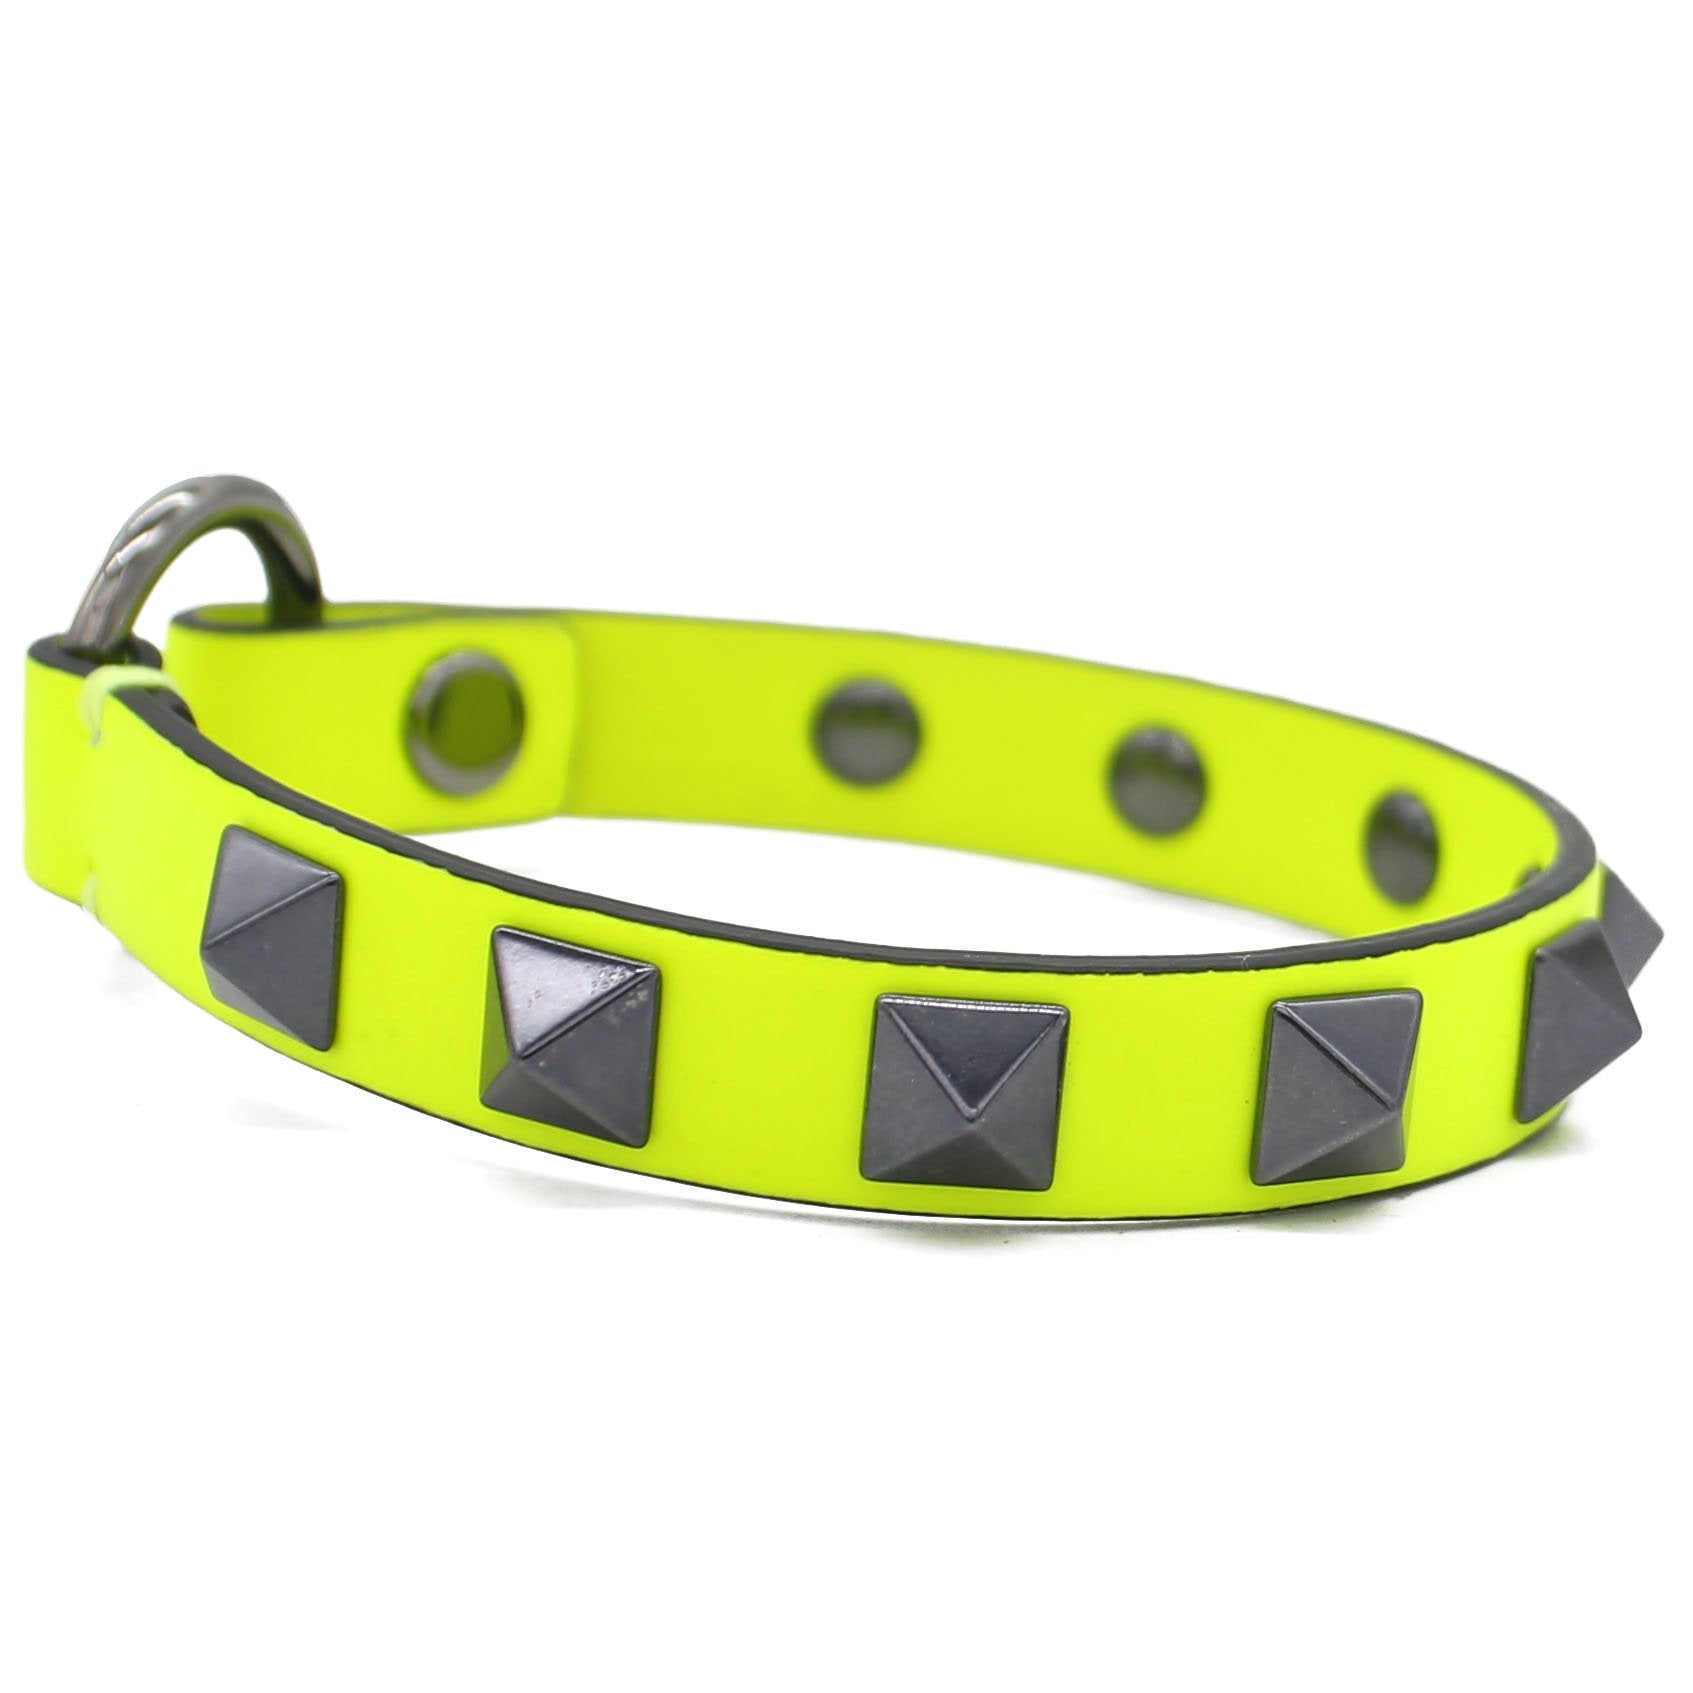 Louis Vuitton Fluo Necklace Bracelet Yellow in Calfskin Leather